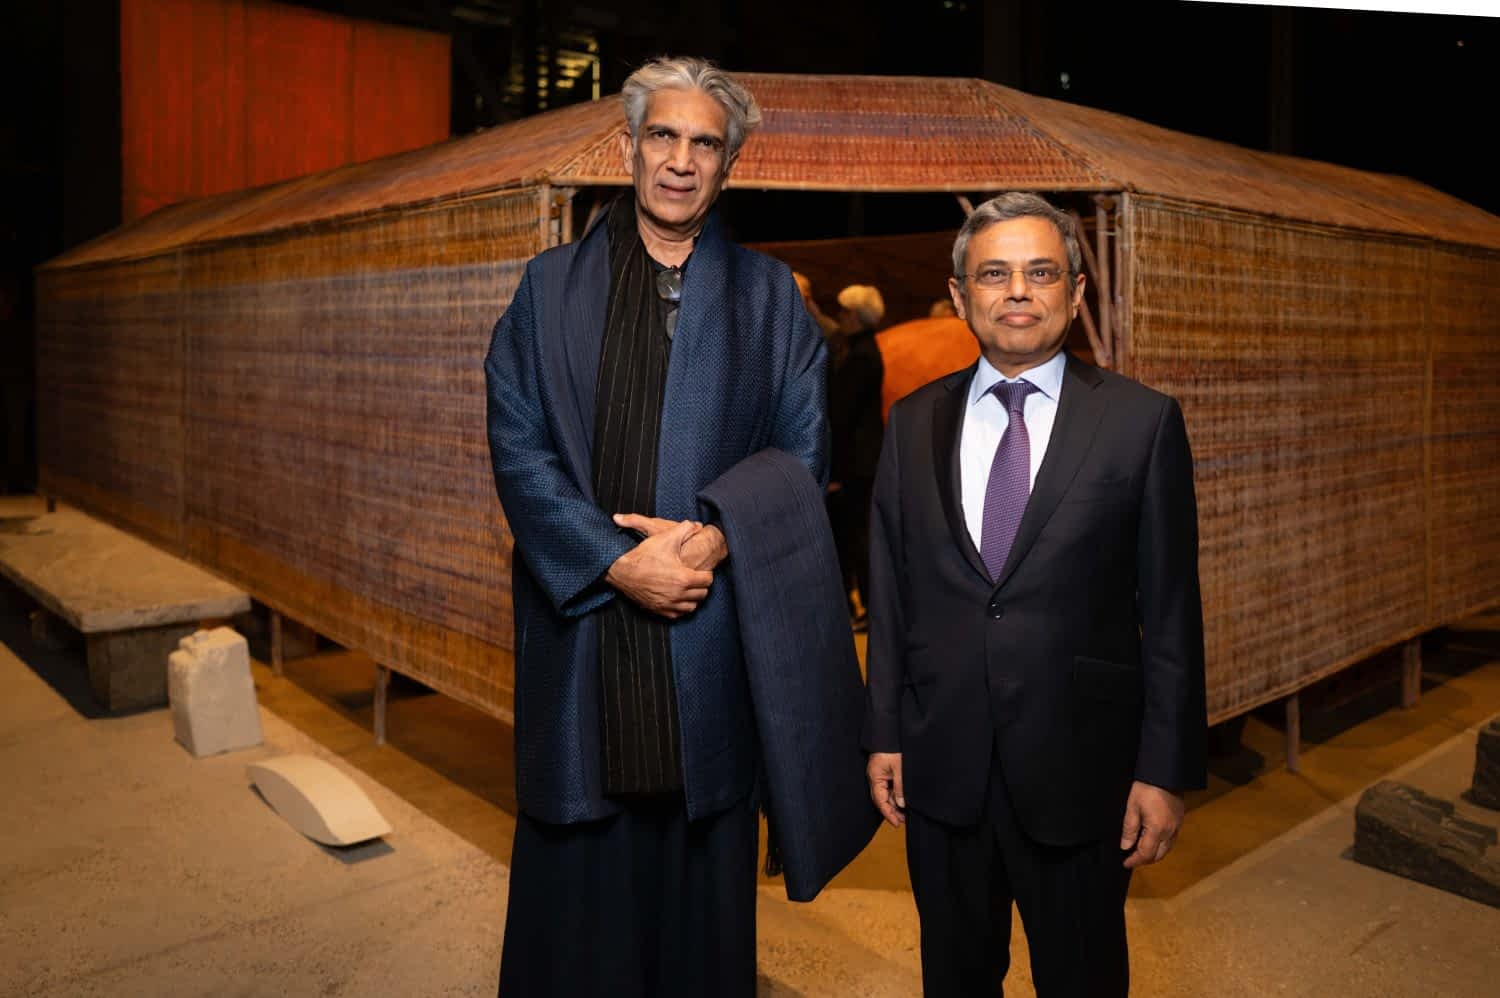 Fondation Cartier pour l’art contemporain presents 'Breath of an Architect', specially created for the institution by Bijoy Jain, founder of Studio Mumbai.